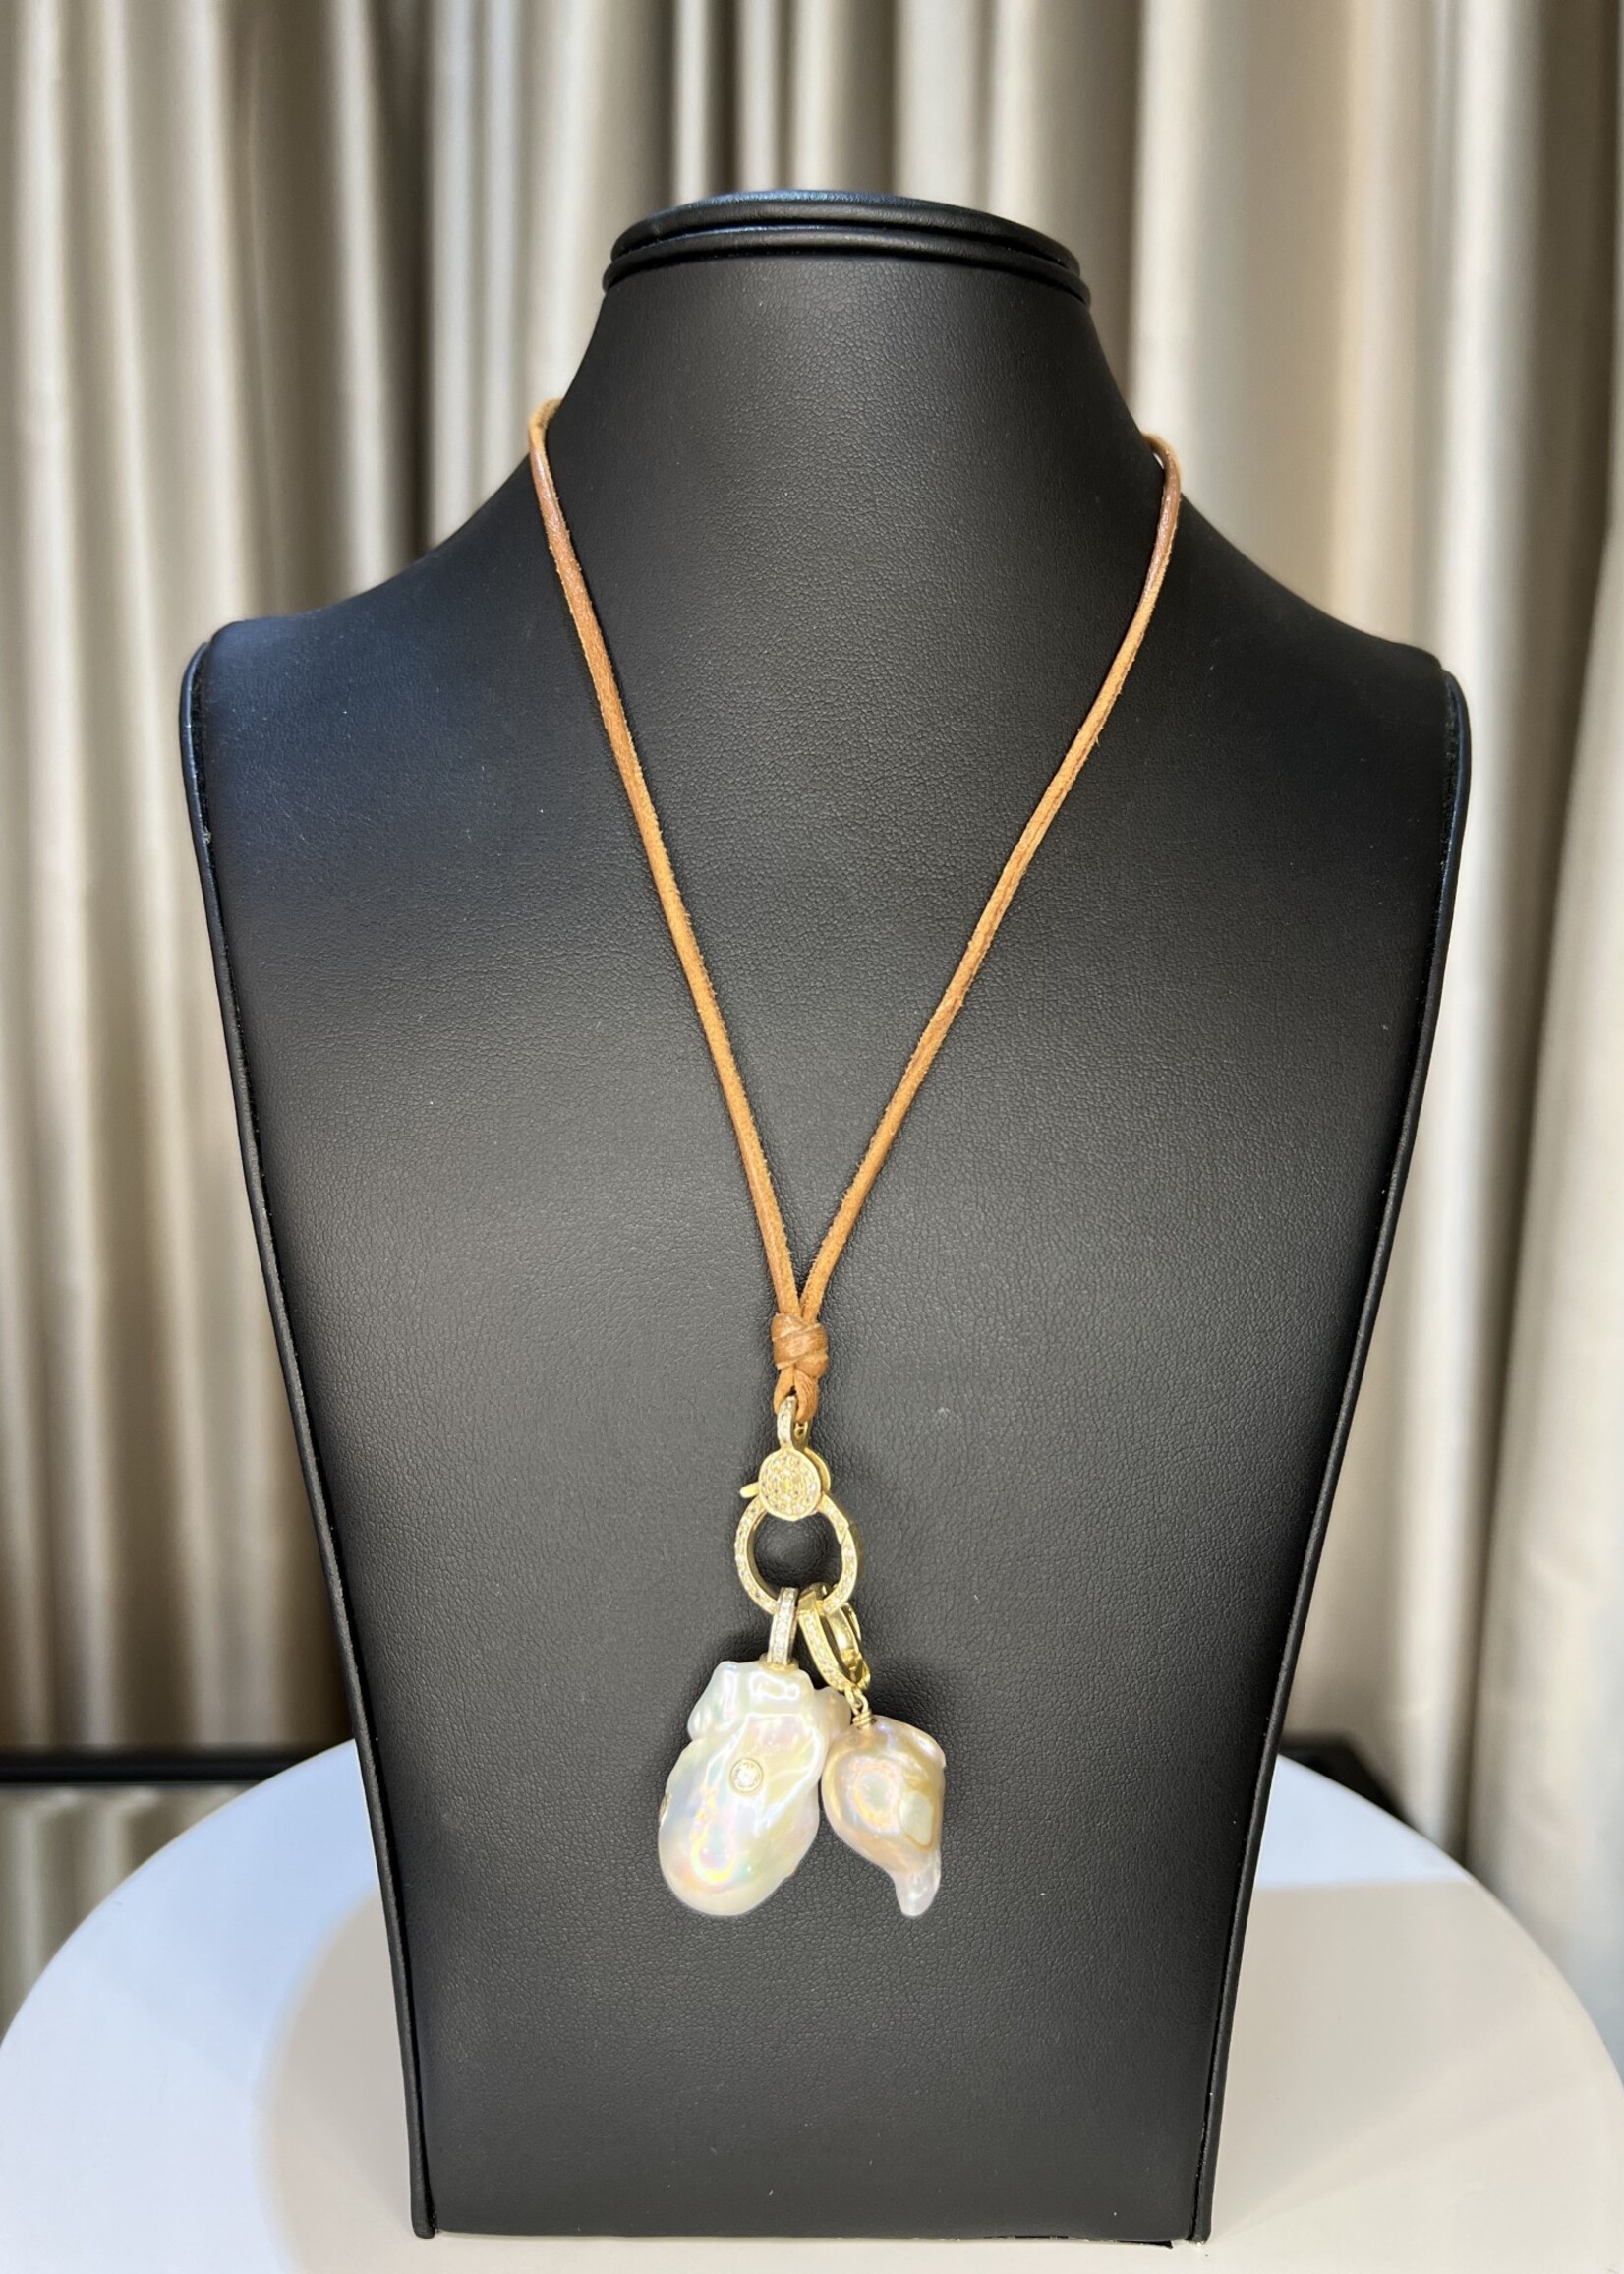 Mina Danielle White Baroque Pearl with Diamonds and Gray Baroque Pearl hang from a Gold Diamond Lobster clasp. Neckalce is finisehd off with a Pearl button Closure. Light brown leather cord.